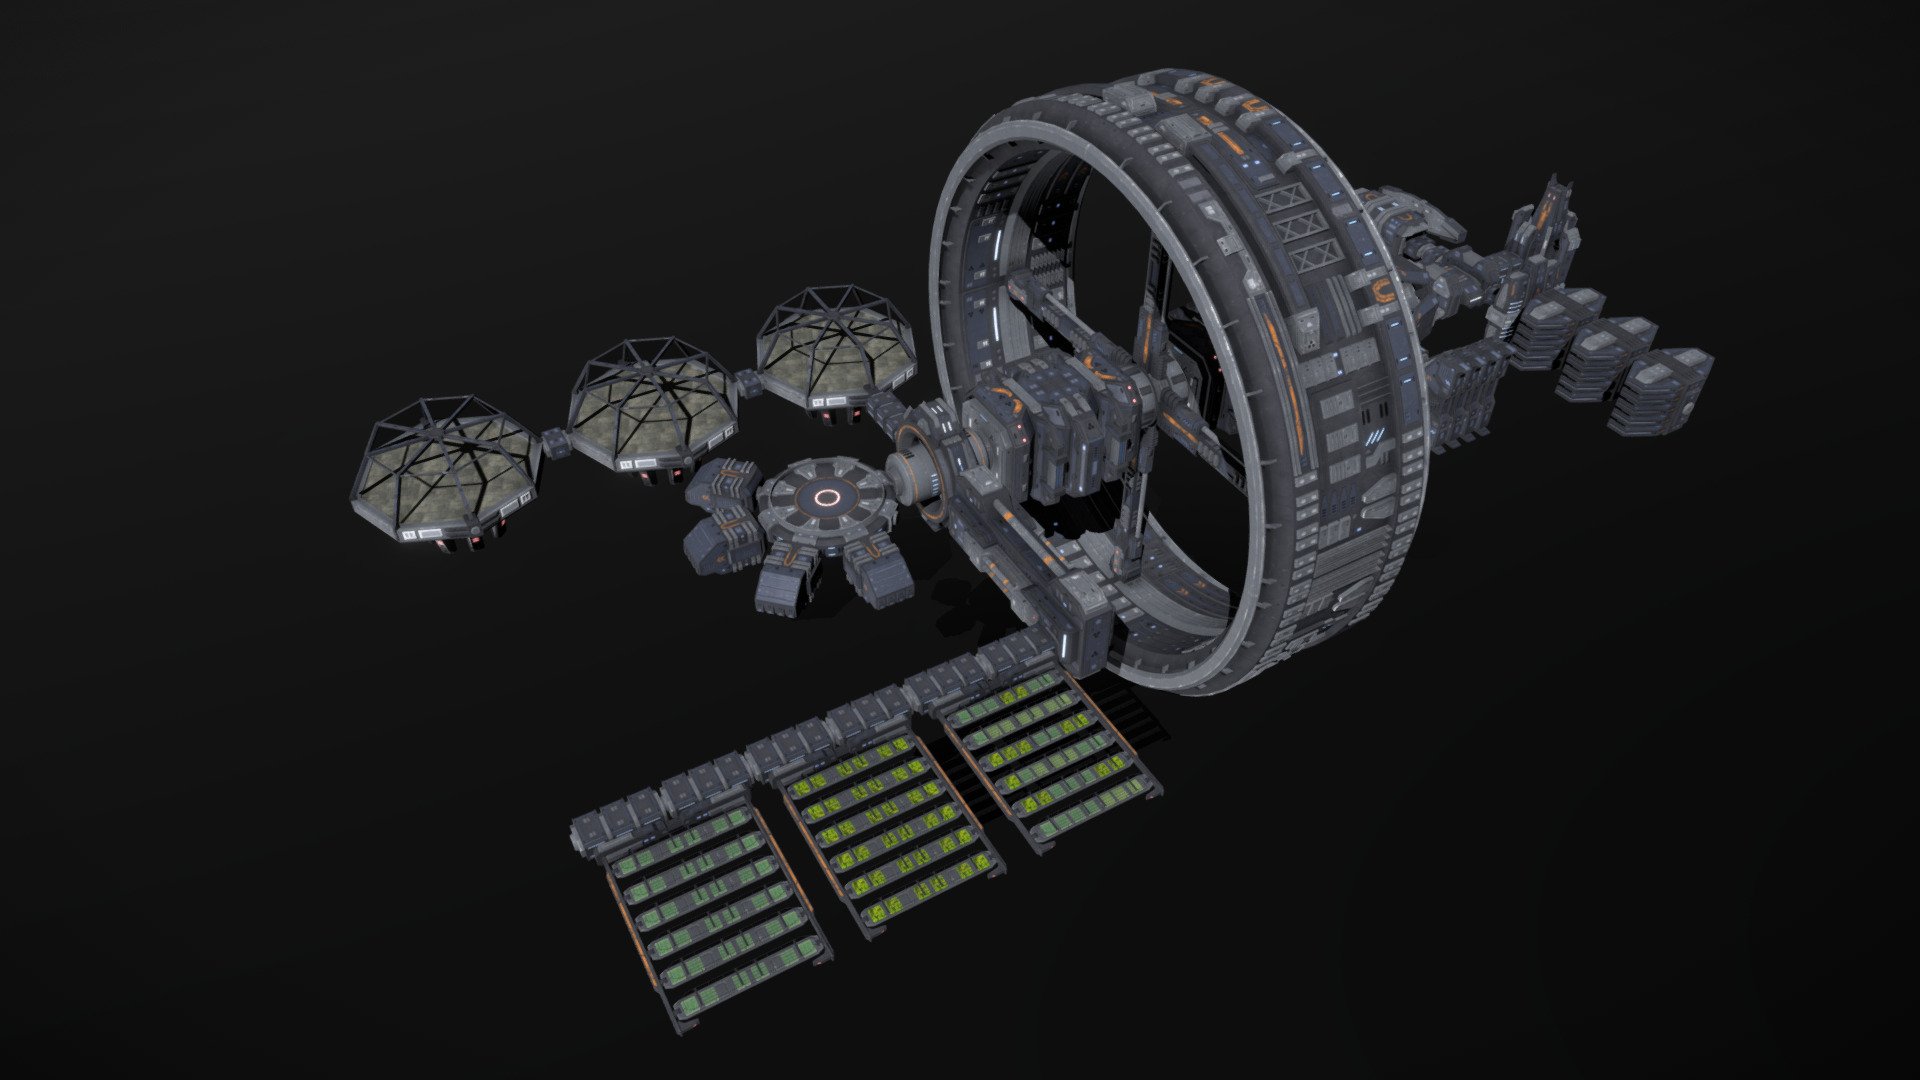 This is a model of a low-poly and game-ready modular scifi space station. 

The weapons are separate meshes and can be animated with a keyframe animation tool. The weapon loadout can be changed as well.

The model comes with several differently colored texture sets. The PSD file with intact layers is included too.

Please note: The textures in the Sketchfab viewer have a reduced resolution to improve Sketchfab loading speed.

If you have purchased this model please make sure to download the “additional file”.  It contains FBX and OBJ meshes, full resolution textures and the source PSDs with intact layers. The meshes are separate and can be animated (e.g. firing animations for gun barrels, rotating turrets, etc) 3d model